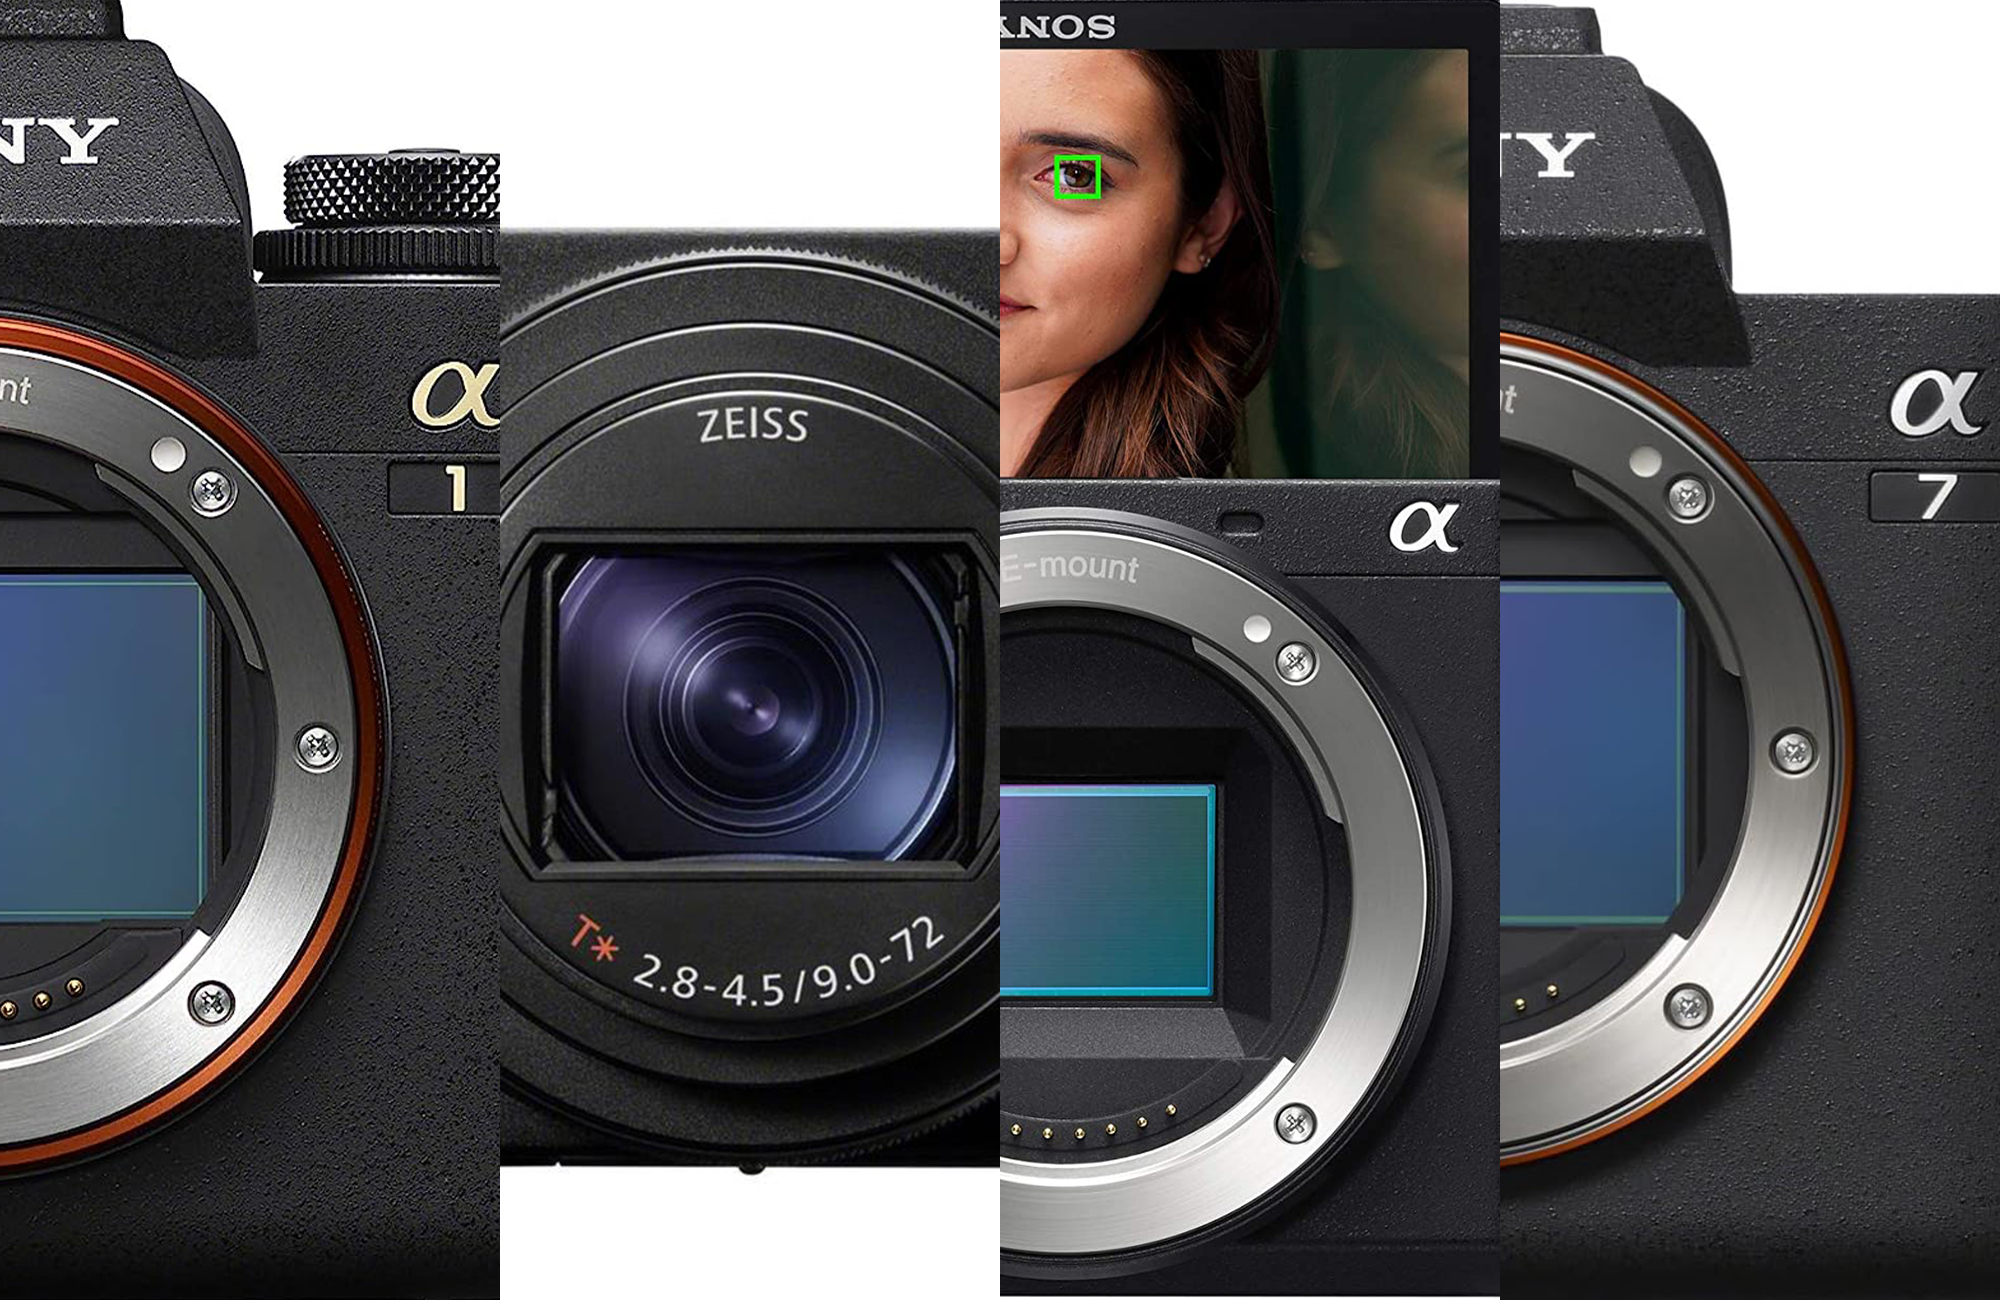 Rent a Sony a7 II Full-Frame Mirrorless Camera, Best Prices